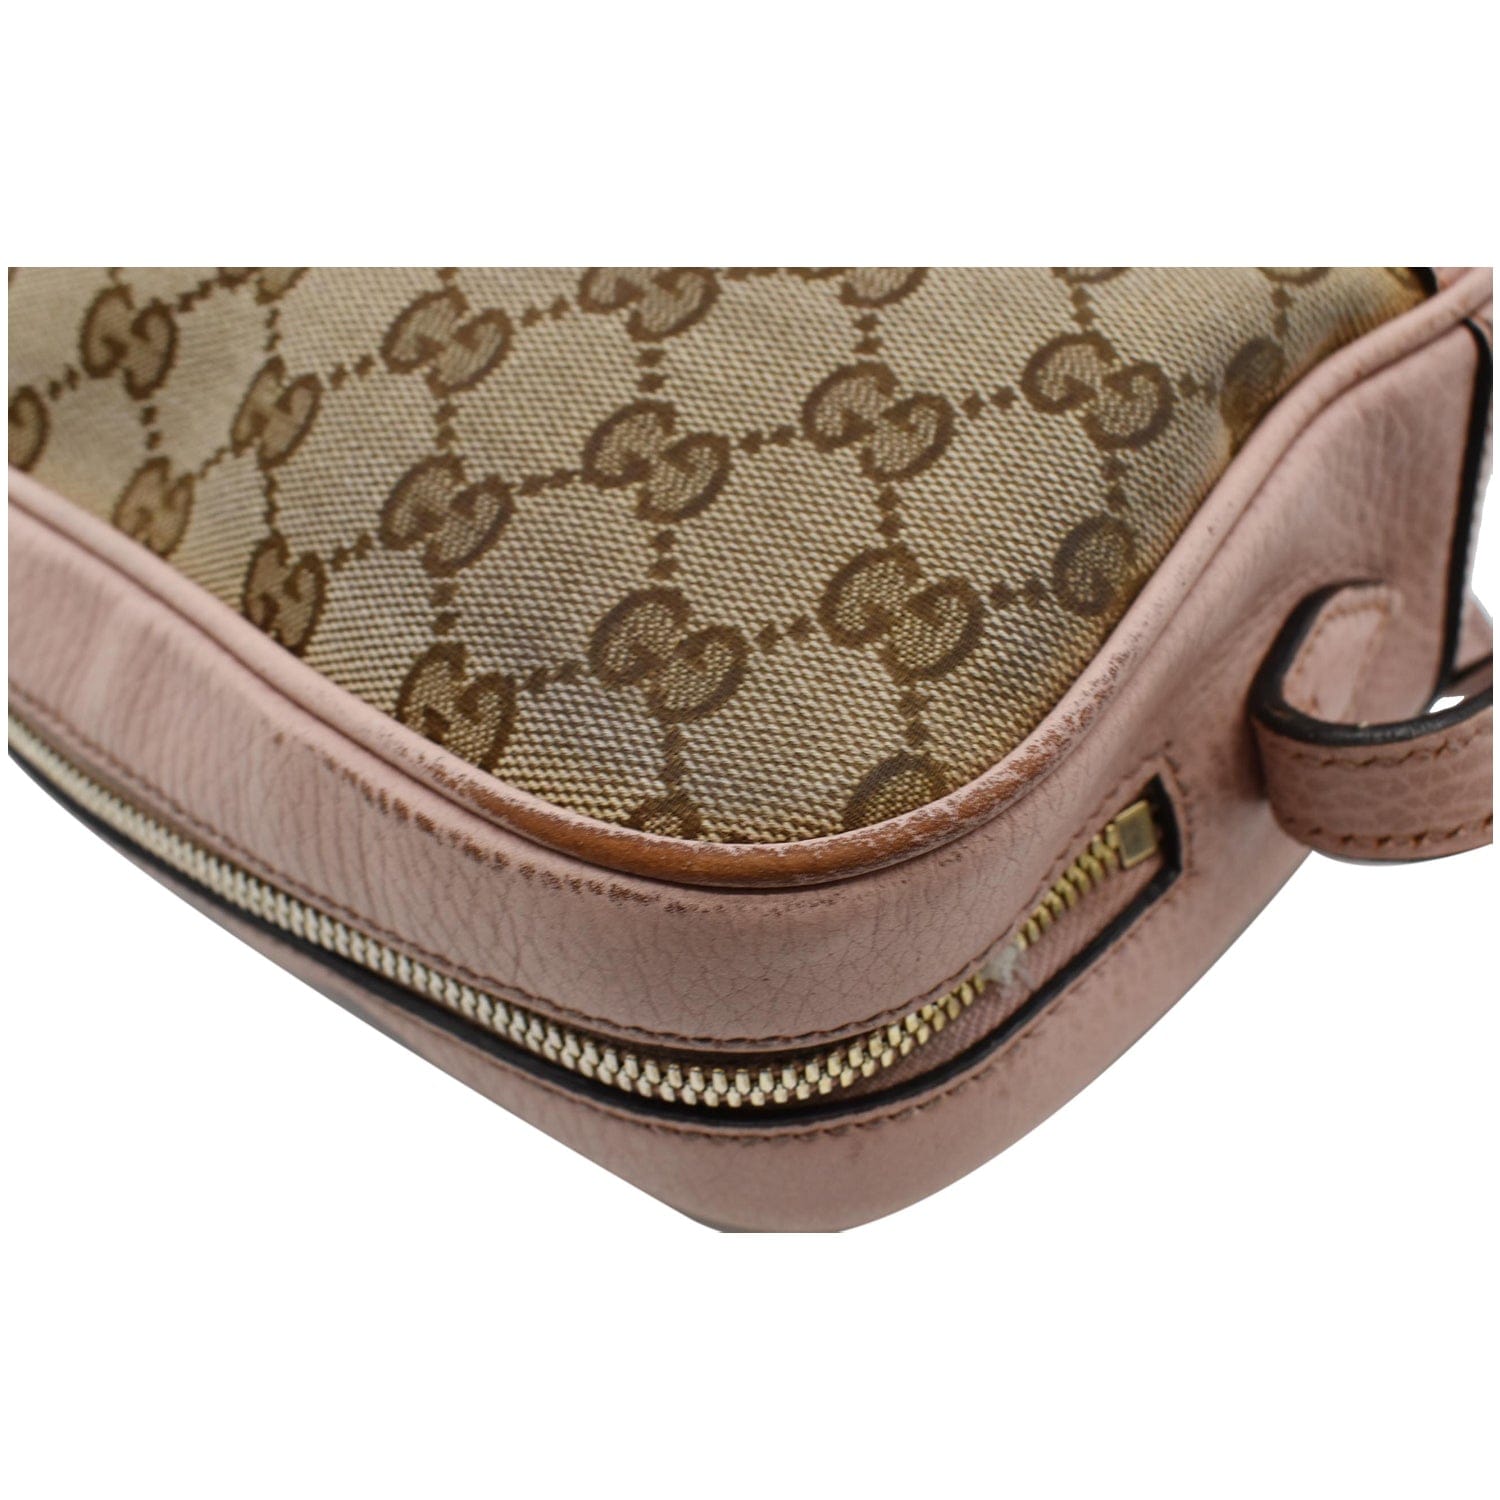 GUCCI Bree GG Canvas Leather Crossbody Bag Pink 449413